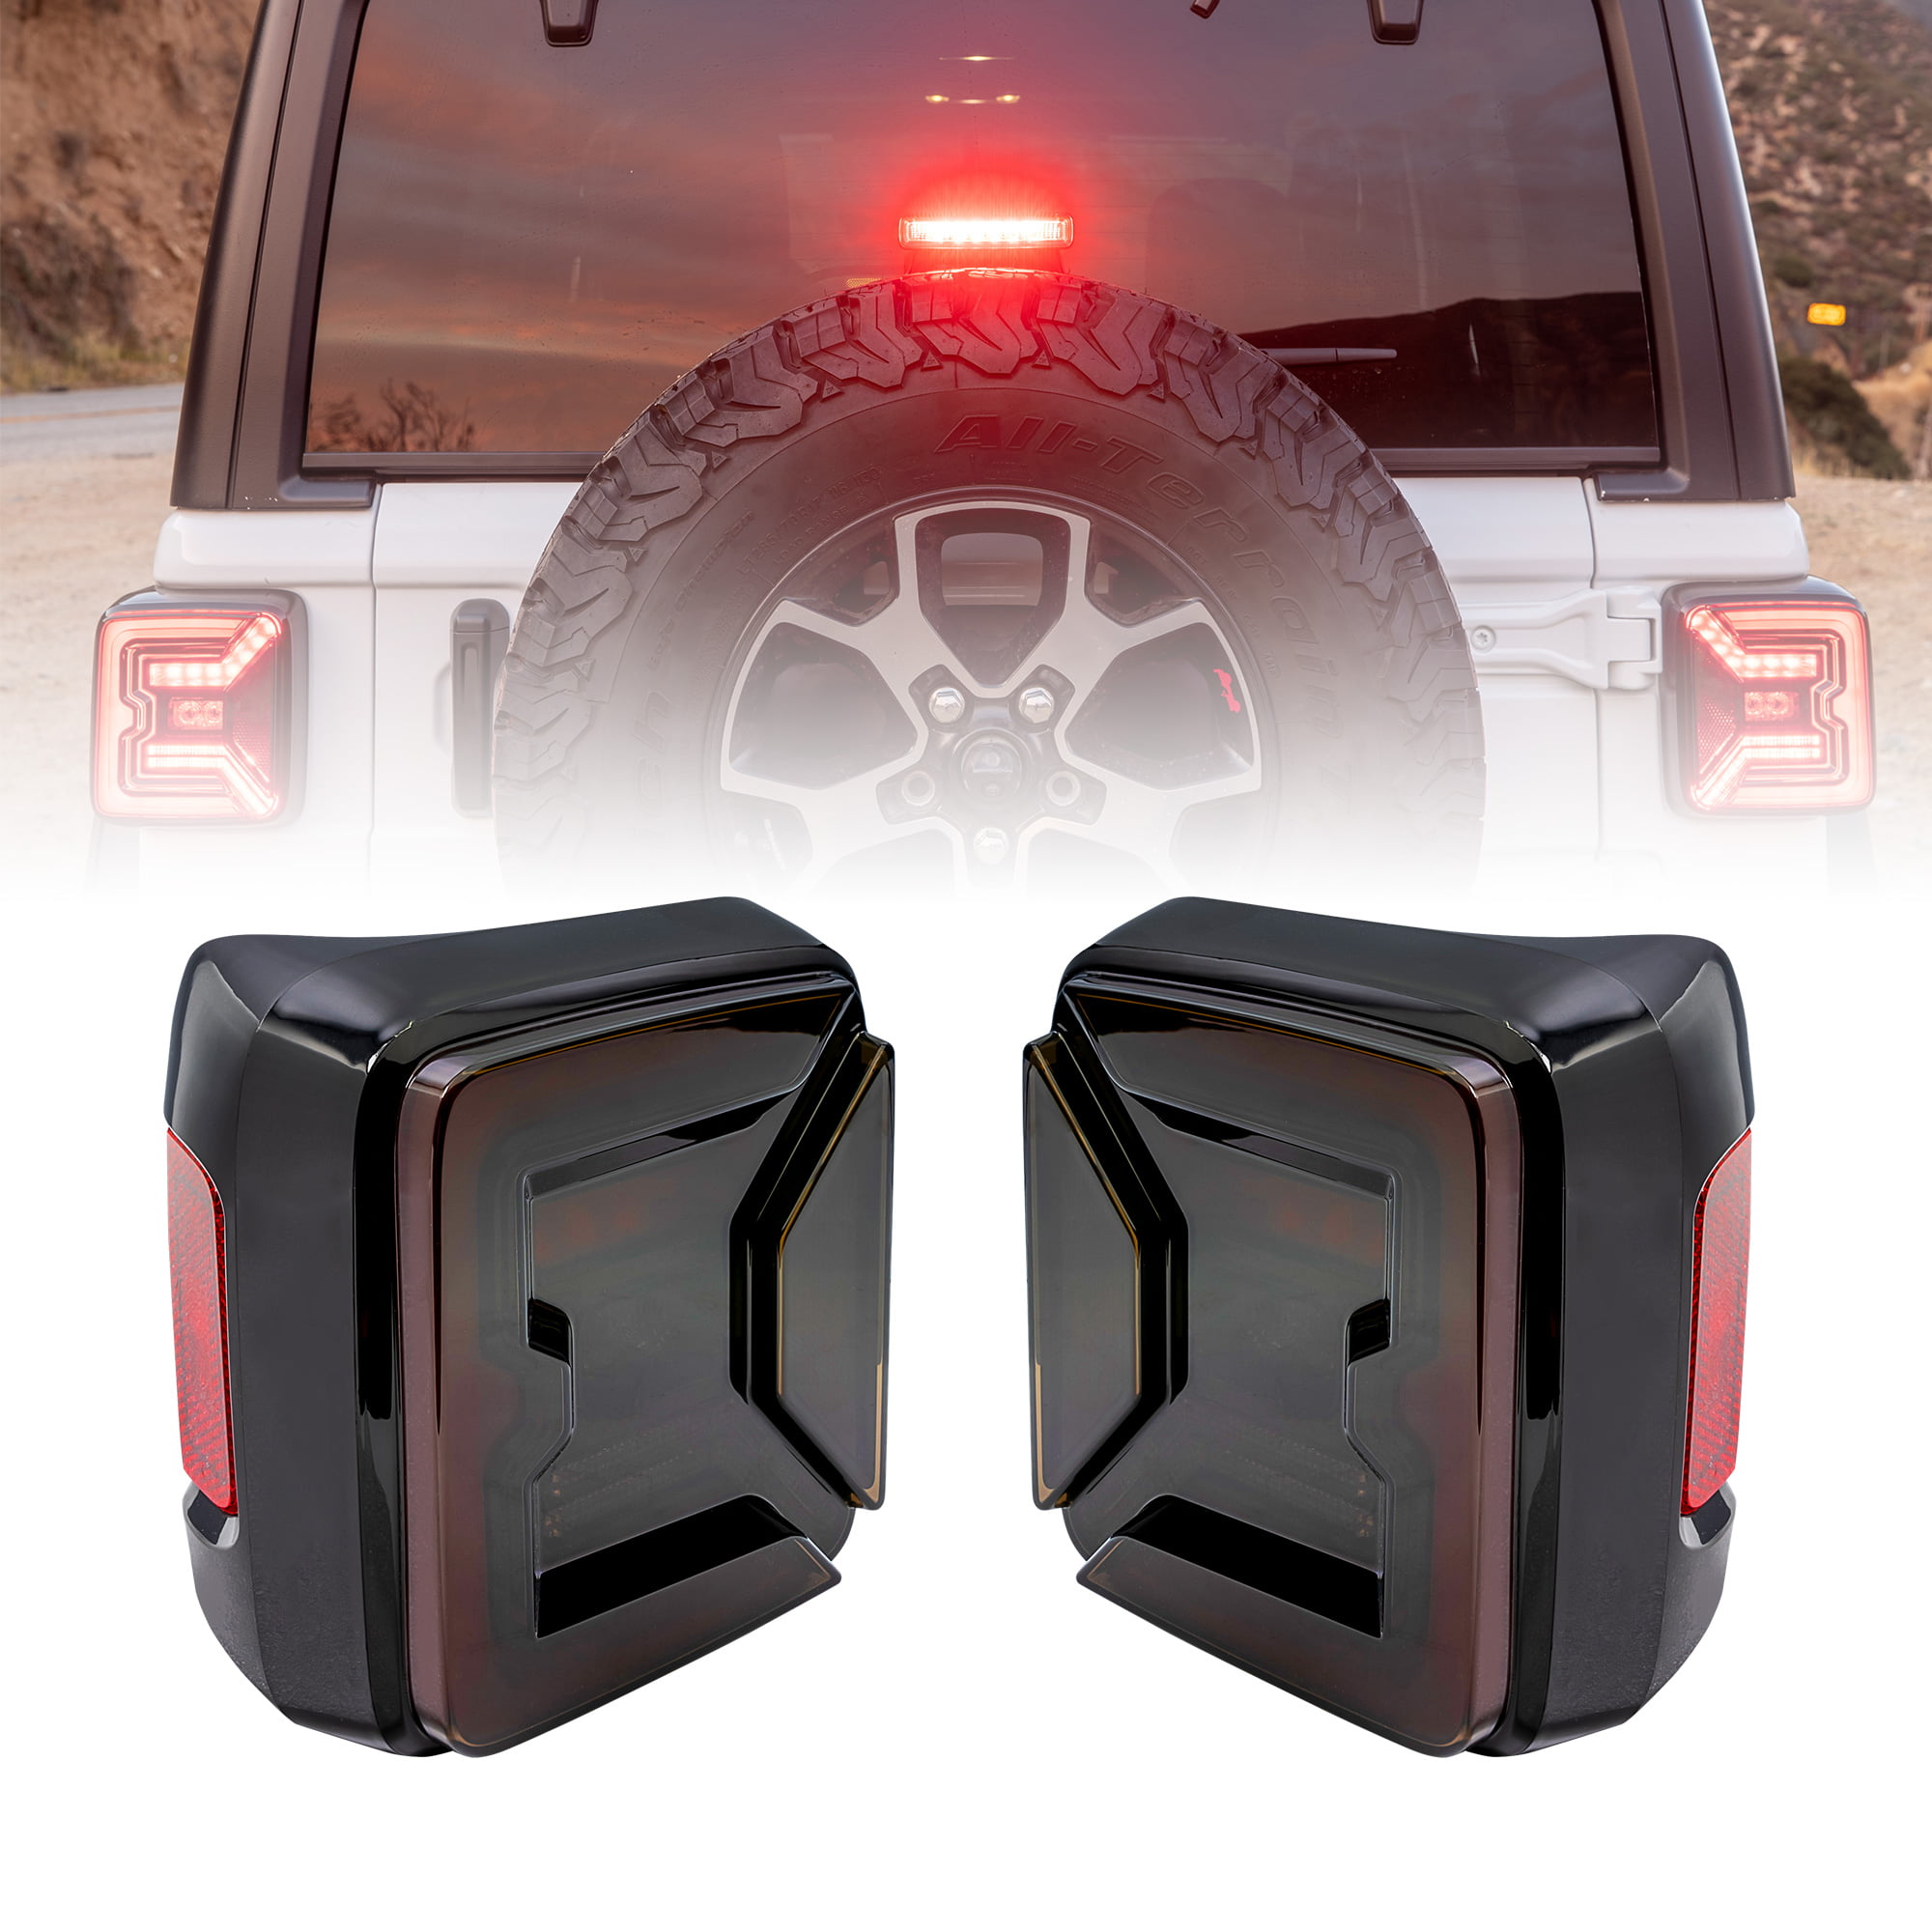 LED Tail Light Replacement for Jeep 2018+ Wrangler JL [Black-Lens]  [Plug-n-Play] [IP67 Waterproof] LED Brake Light Compatible with Jeep  Wrangler JL Accessories 